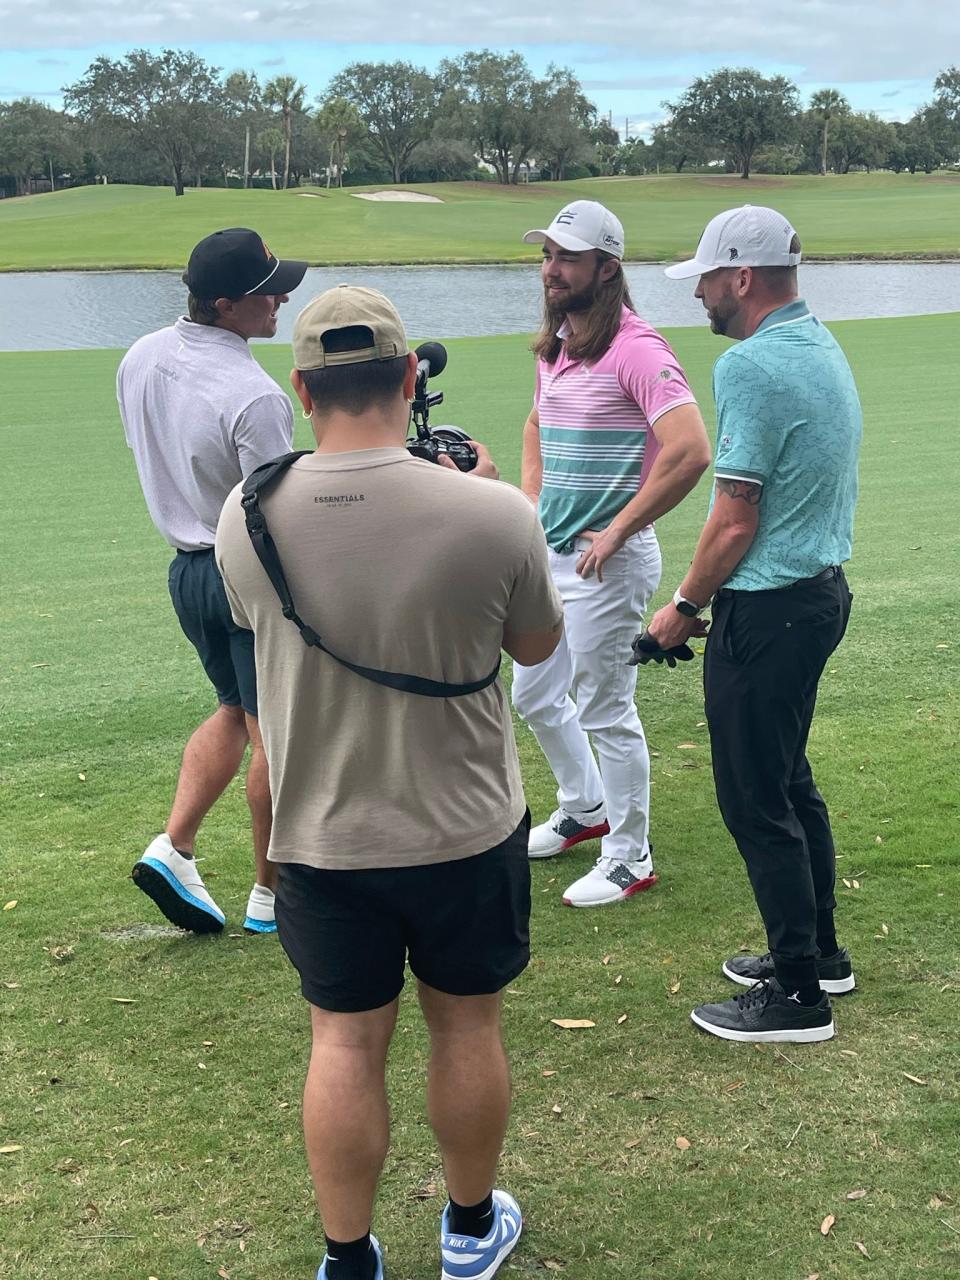 World Long Drive champion Kyle Berkshire (pink shirt) is interviewed at Bear Lakes Country Club while filming his ever-popular “Bombers Club” YouTube podcast.